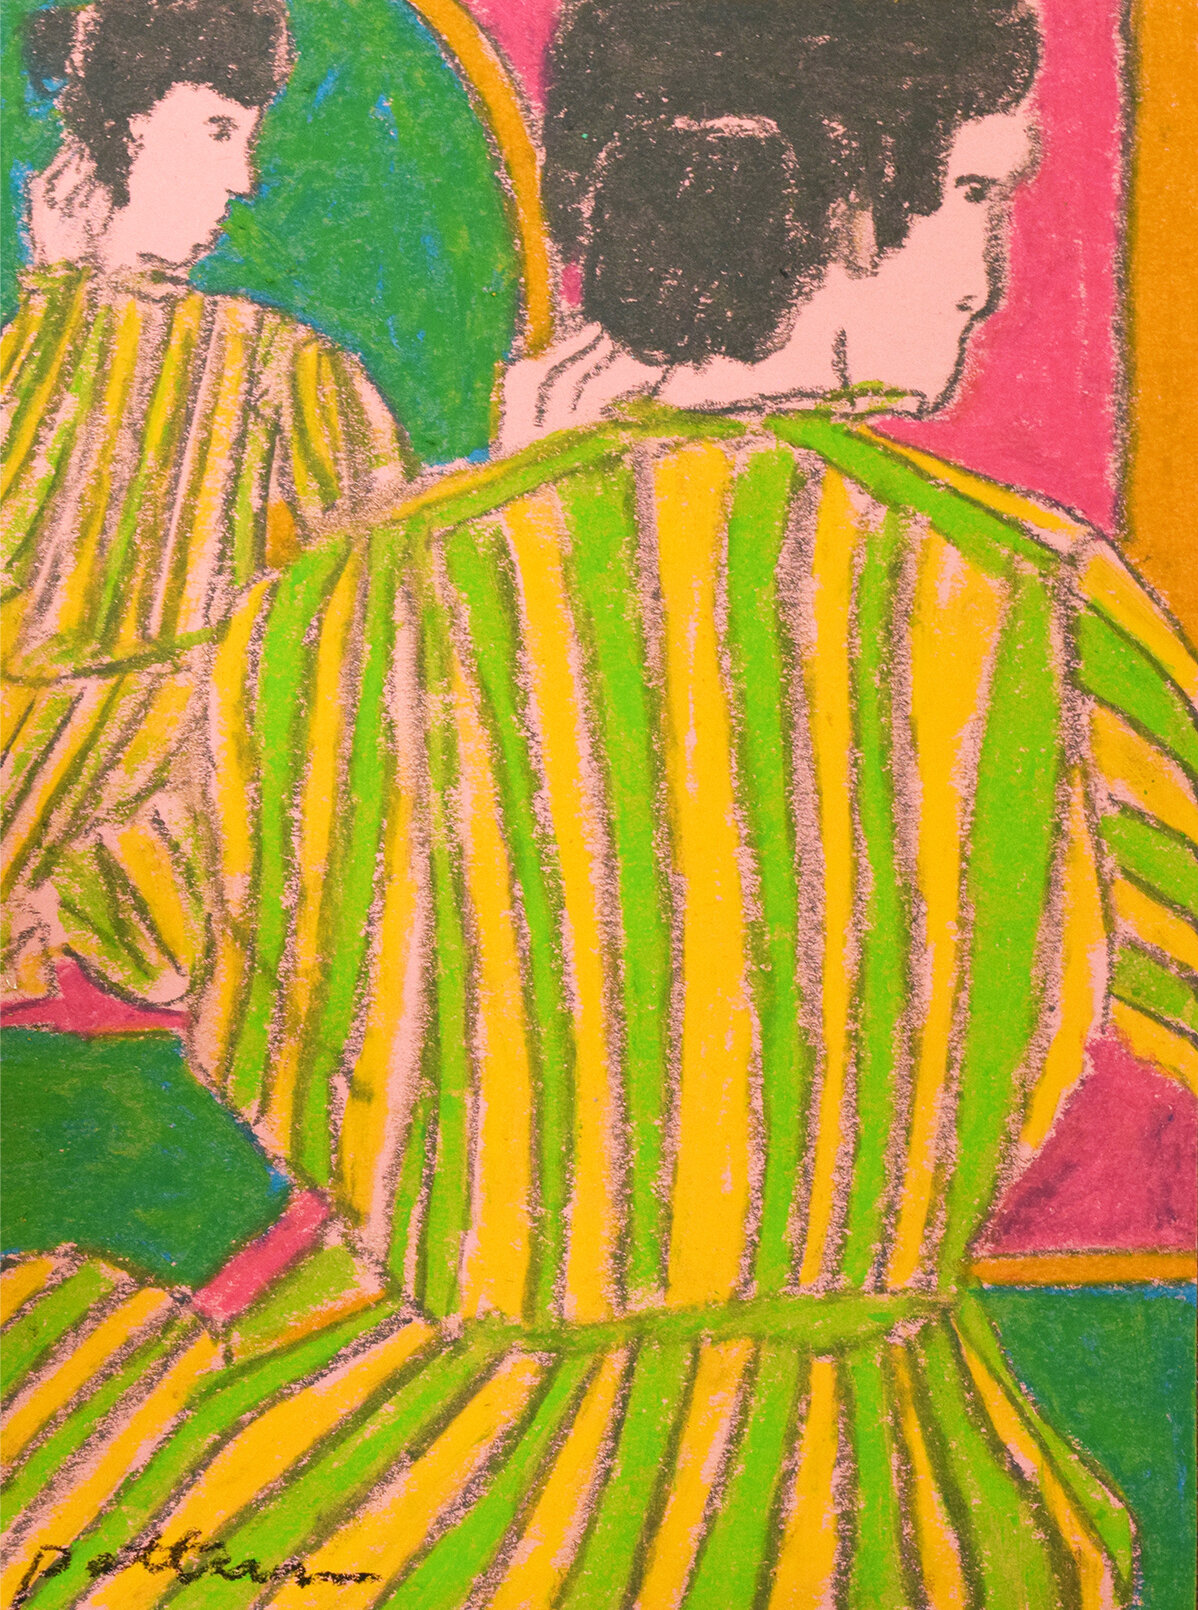 Lady in Striped Robe, 2019, pastel on paper, 8.5 x 11 in.